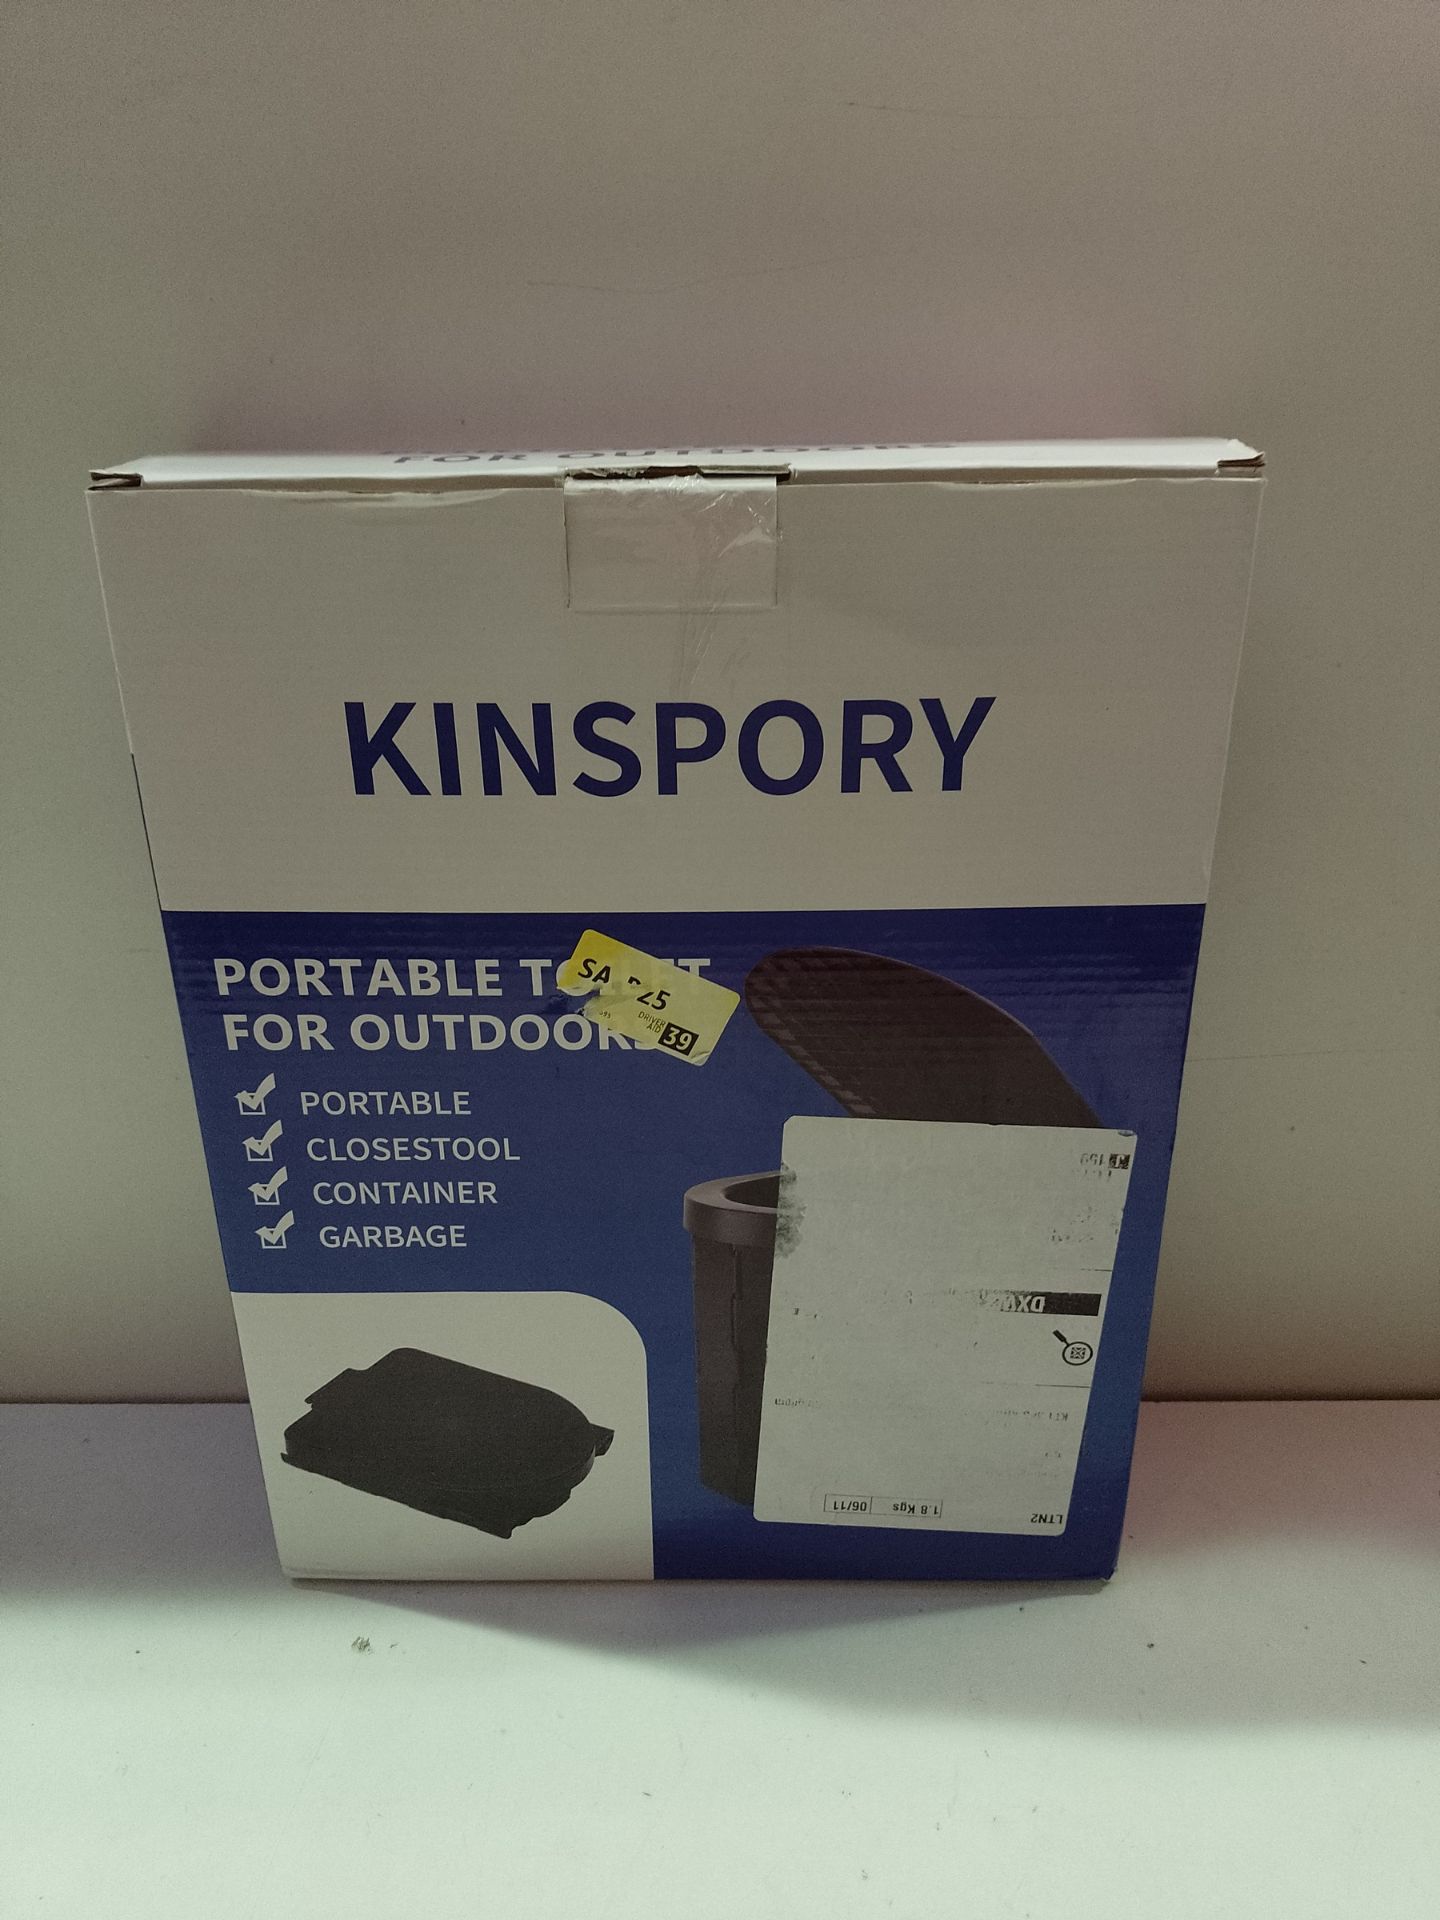 RRP £26.84 Portable Toilet KINSPORY Outdoor Camping Toilet Fishing - Image 2 of 2